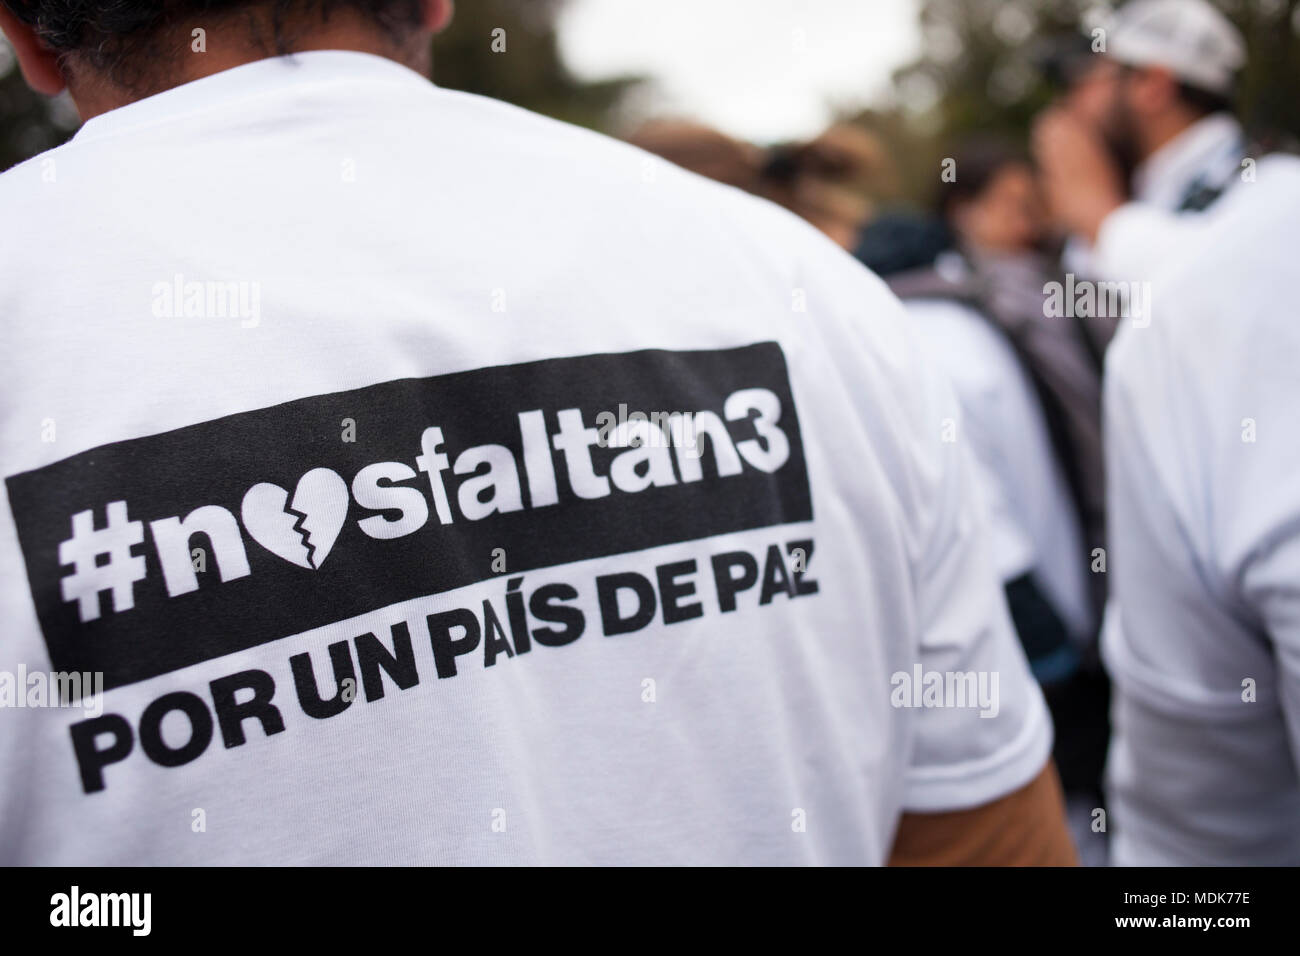 19 April 2018, Ecuador, Quito: A protestor wears a shirt reading '#nosfaltan3 Por un país de Paz' (lit. '#WeAreMissing3. For a country of peace!'). Numerous people have gathered to protest the kidnapping and murder of two journalists working for the newspaper 'El Comercio' and their driver on the border region between Ecuador and Colombia. Photo: Santiago Serrano/dpa Stock Photo